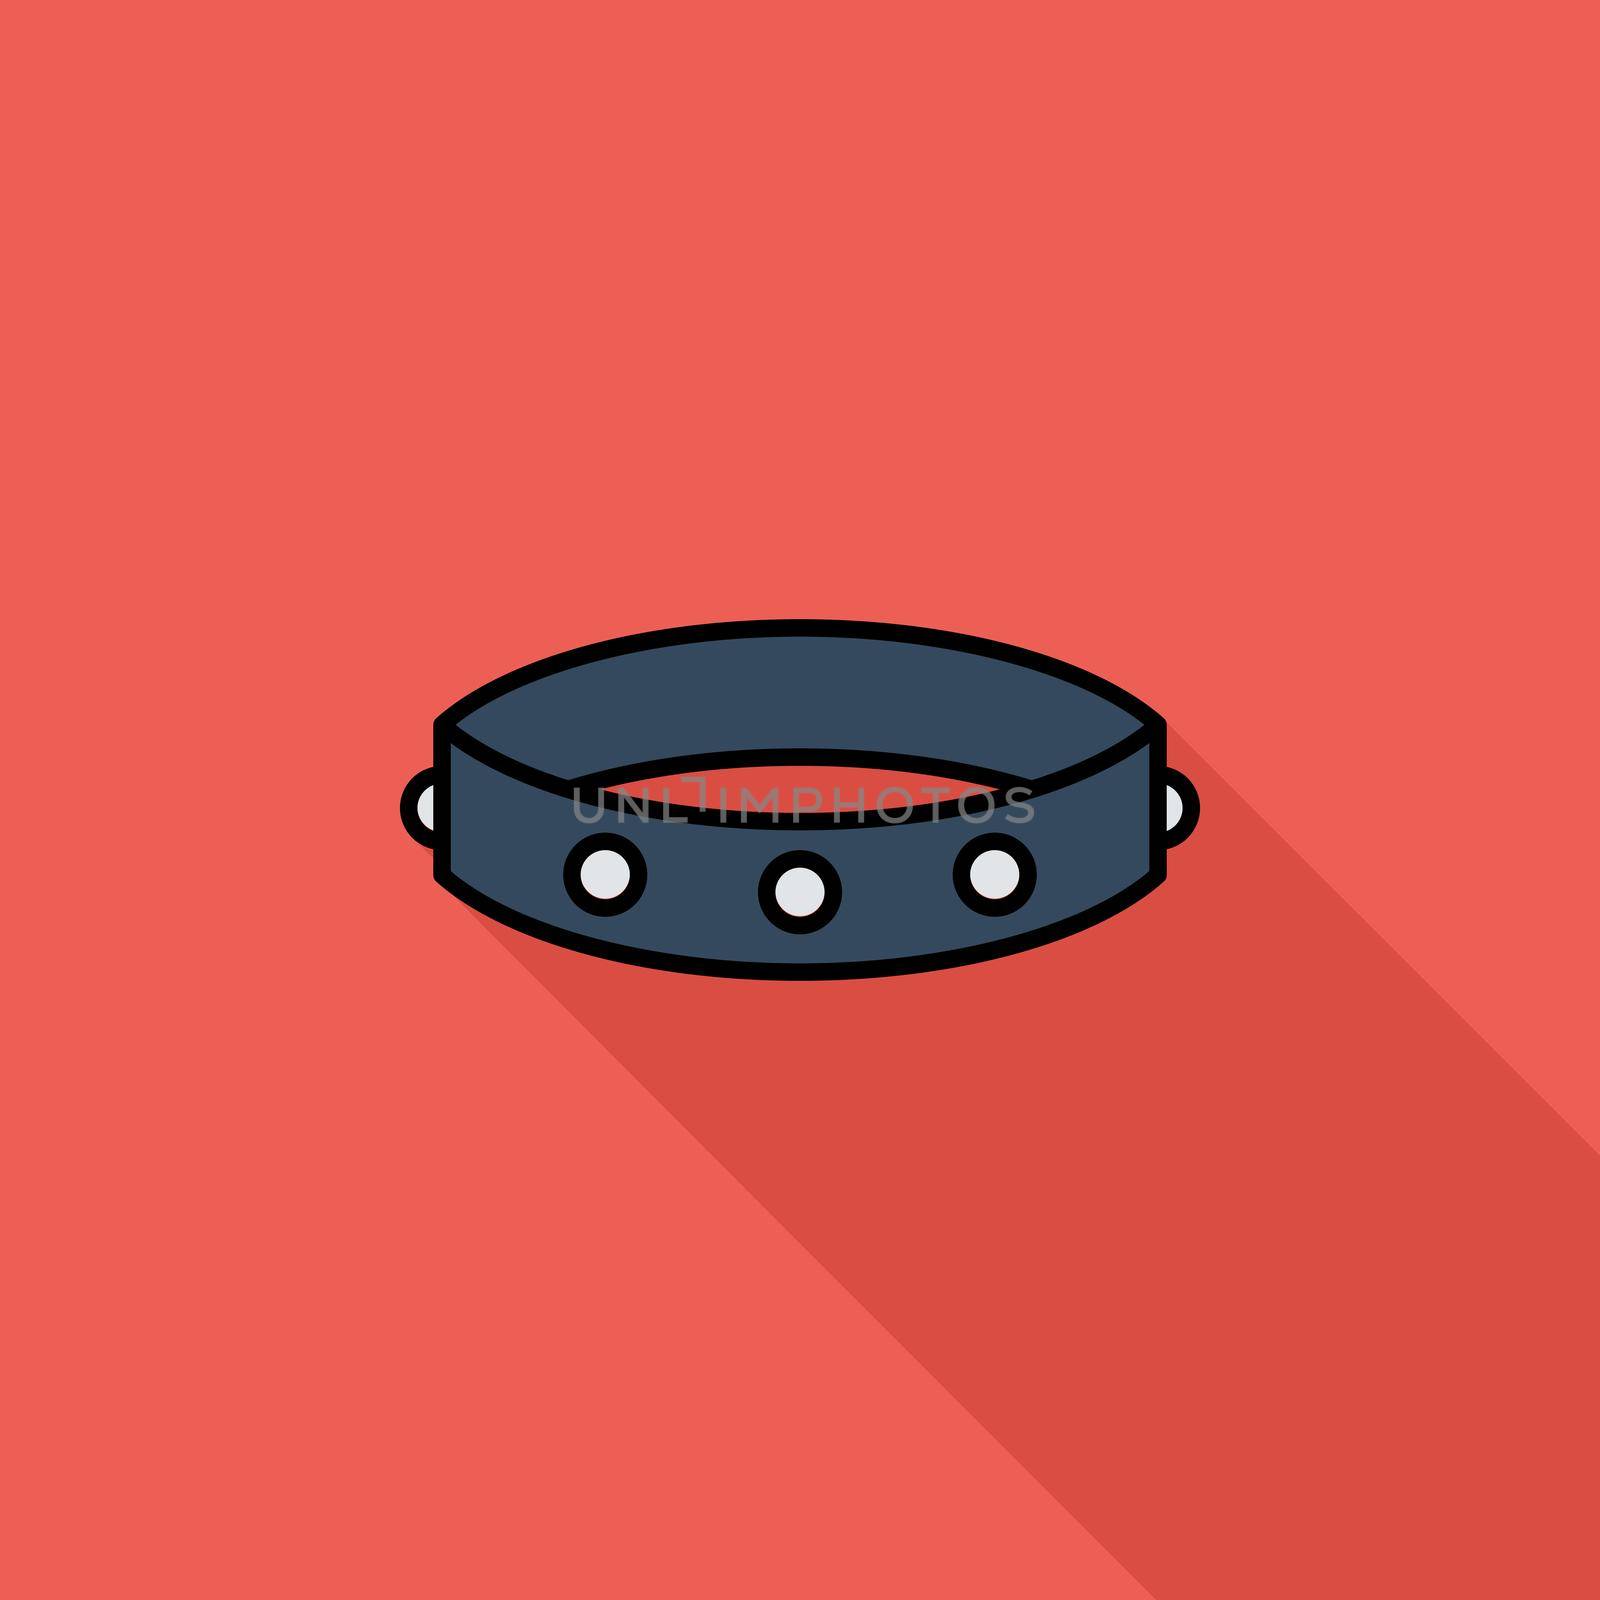 Collar icon. Flat related icon with long shadow for web and mobile applications. It can be used as - logo, pictogram, icon, infographic element. Illustration.